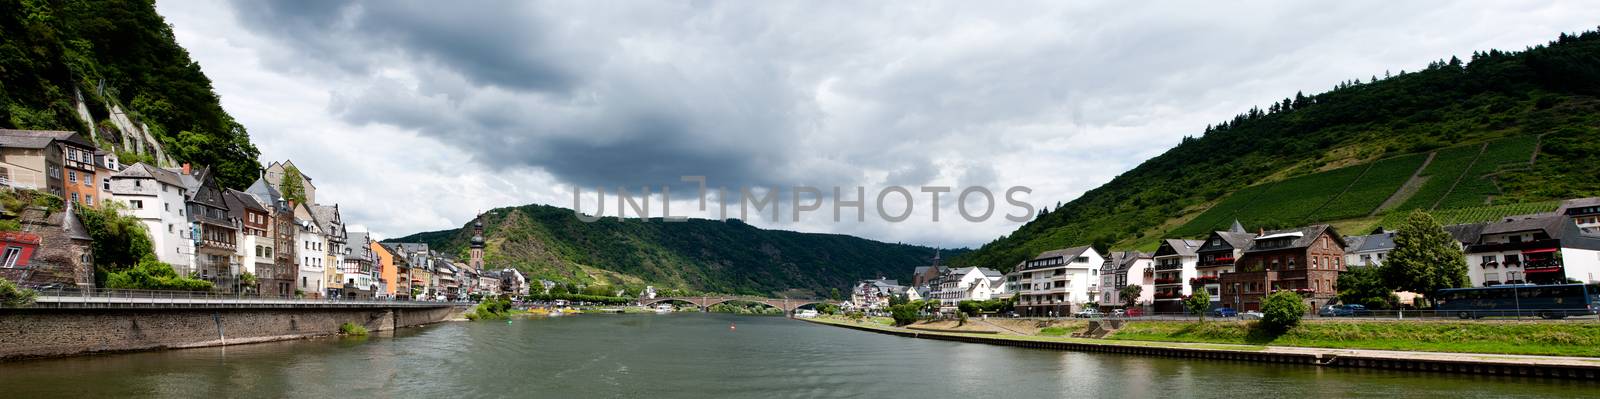 Cochem, Germany - July 17 2016: Panorama of Mosel river and Cochem city in Germany